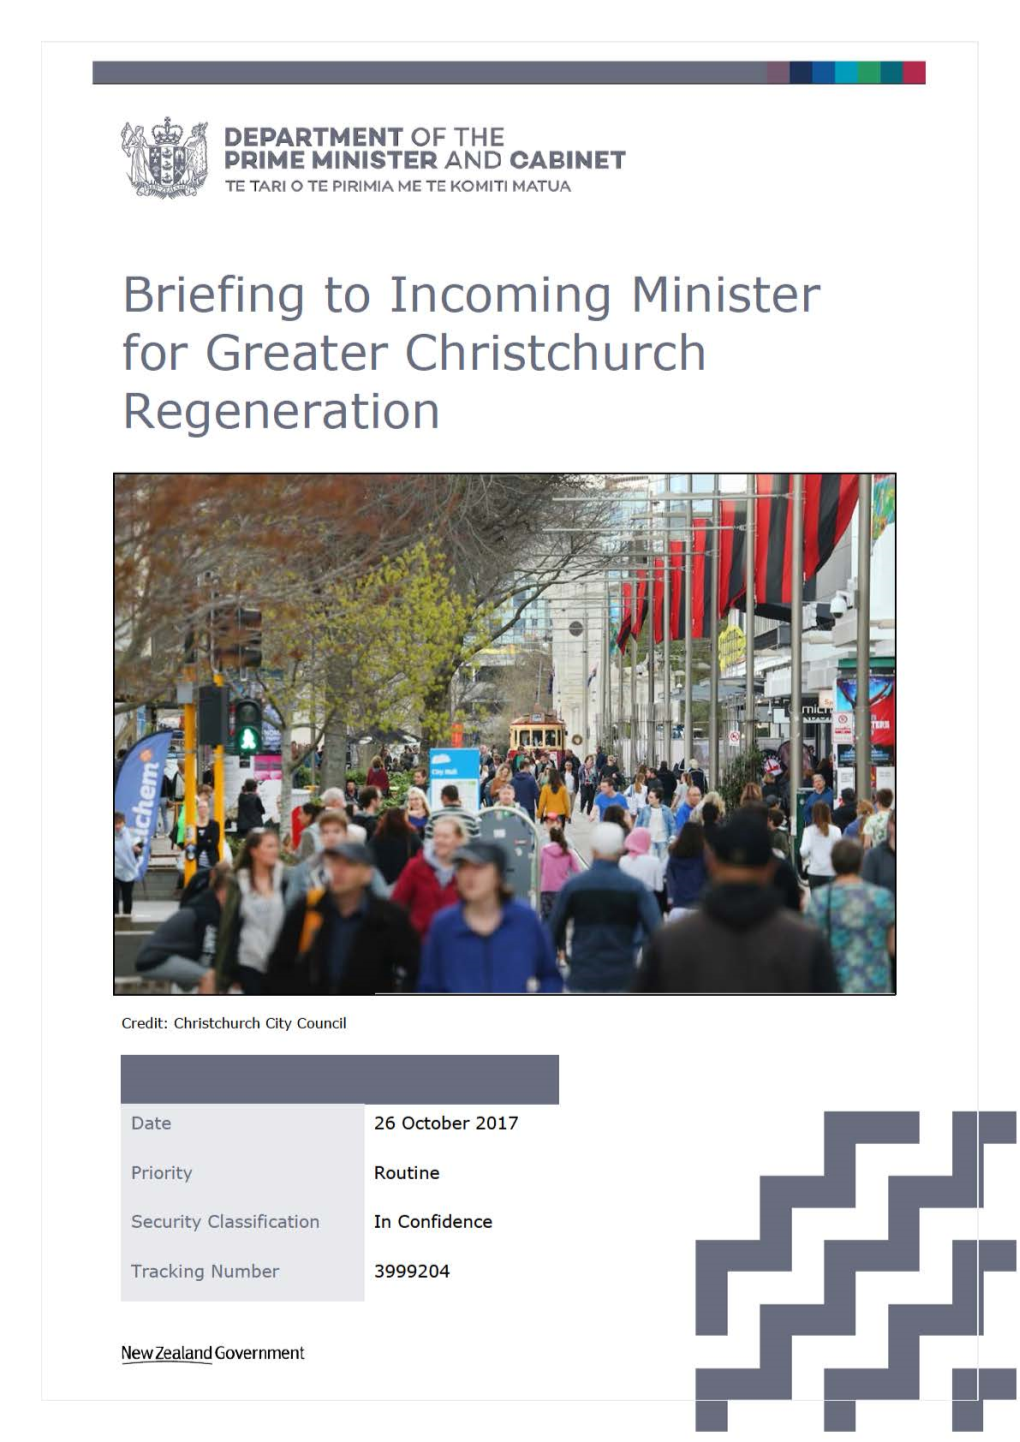 Briefing to Incoming Minister for Greater Christchurch Regeneration